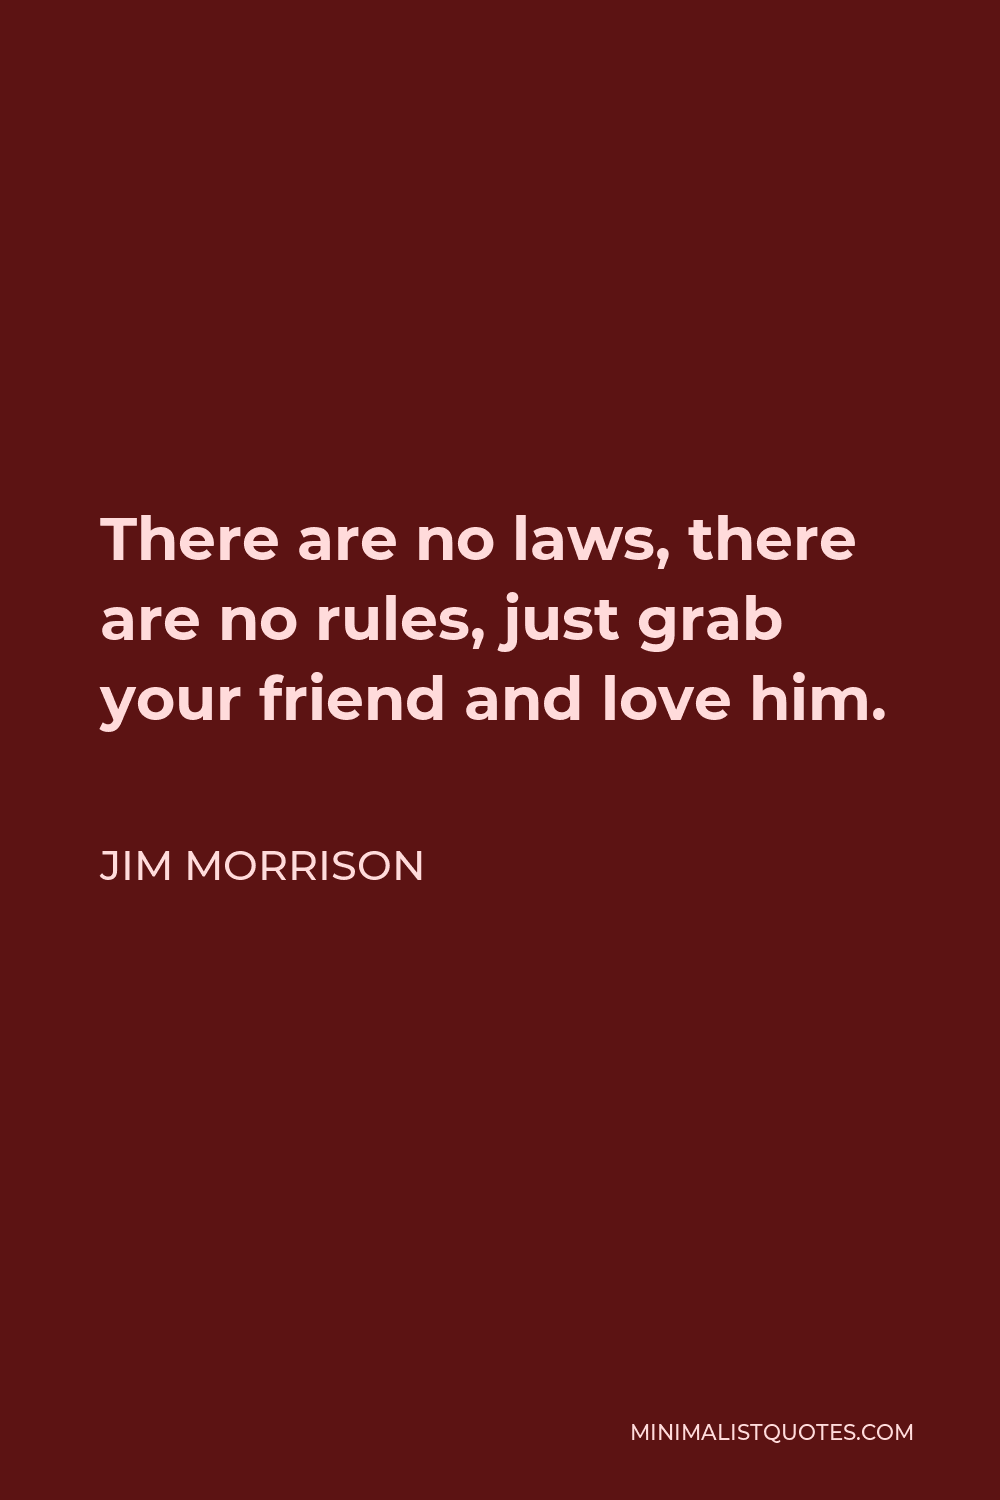 Jim Morrison Quote - There are no laws, there are no rules, just grab your friend and love him.